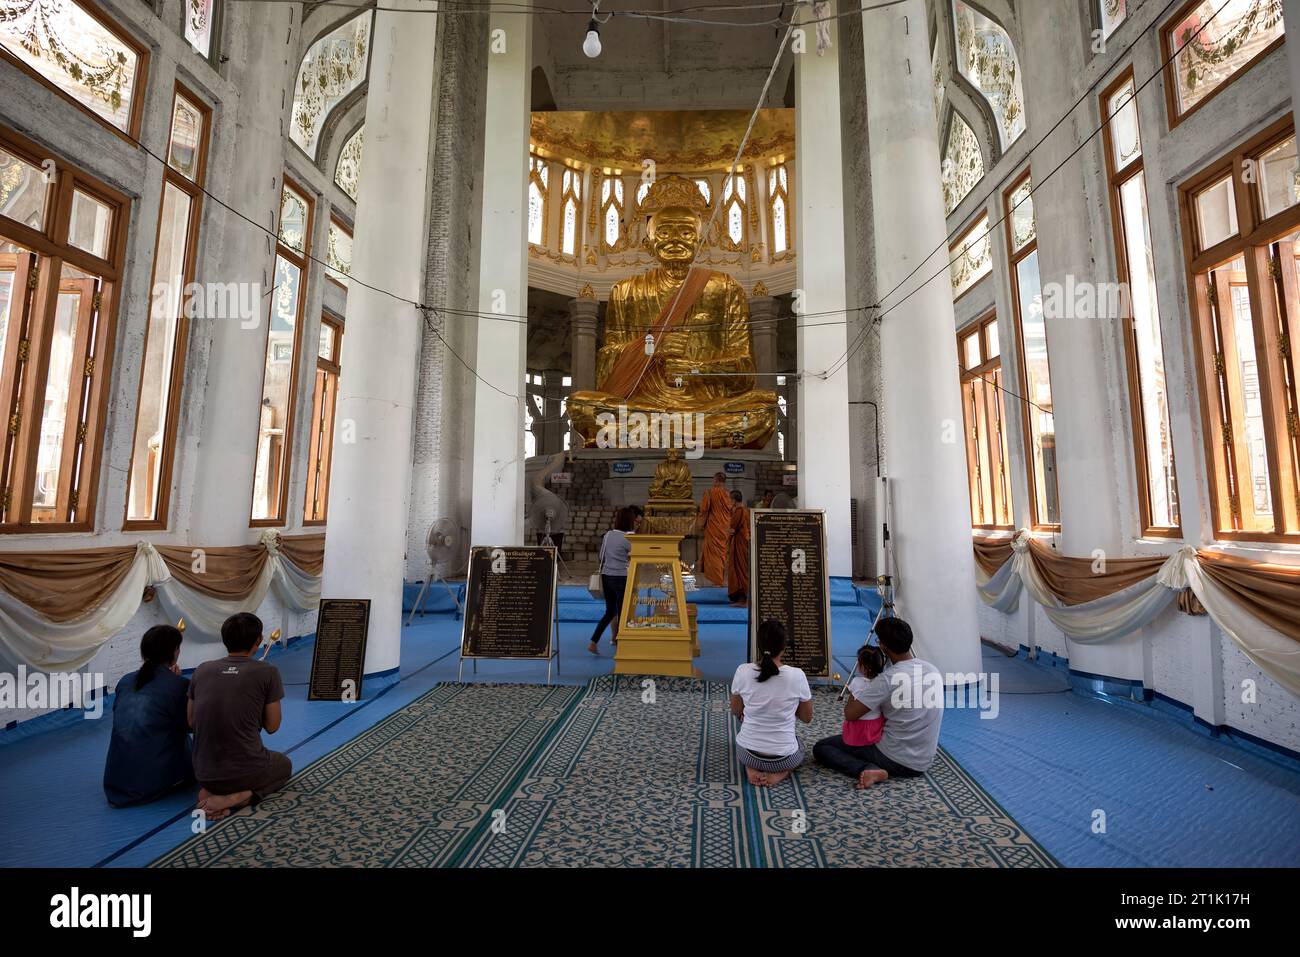 Sikhio, Thailand - Jun 4, 2019: Pilgrims and prayers are paying respect to the highly famous monk statue cover by gold and have a name 'Somdet Phra Bu Stock Photo